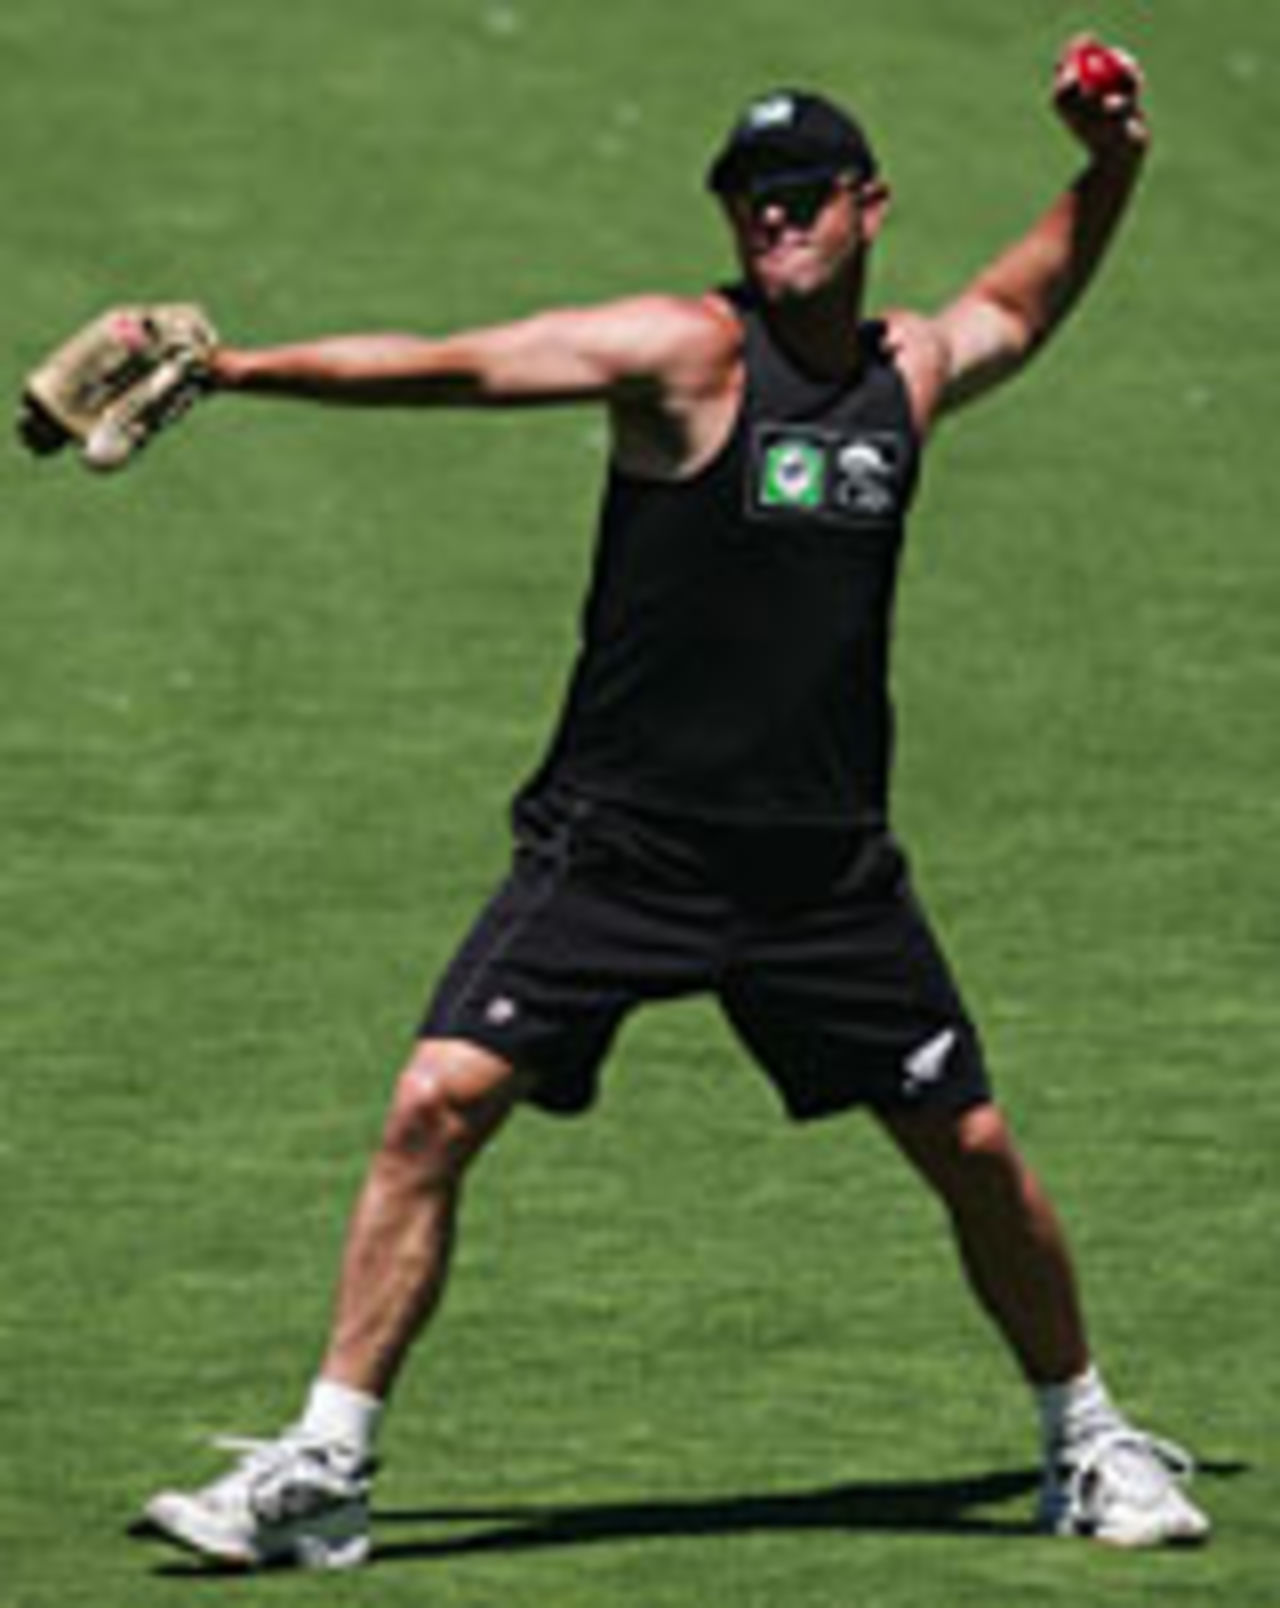 Mark Richardson at practice in the lead up to the second Test against Australia at Adelaide, November 24 2004